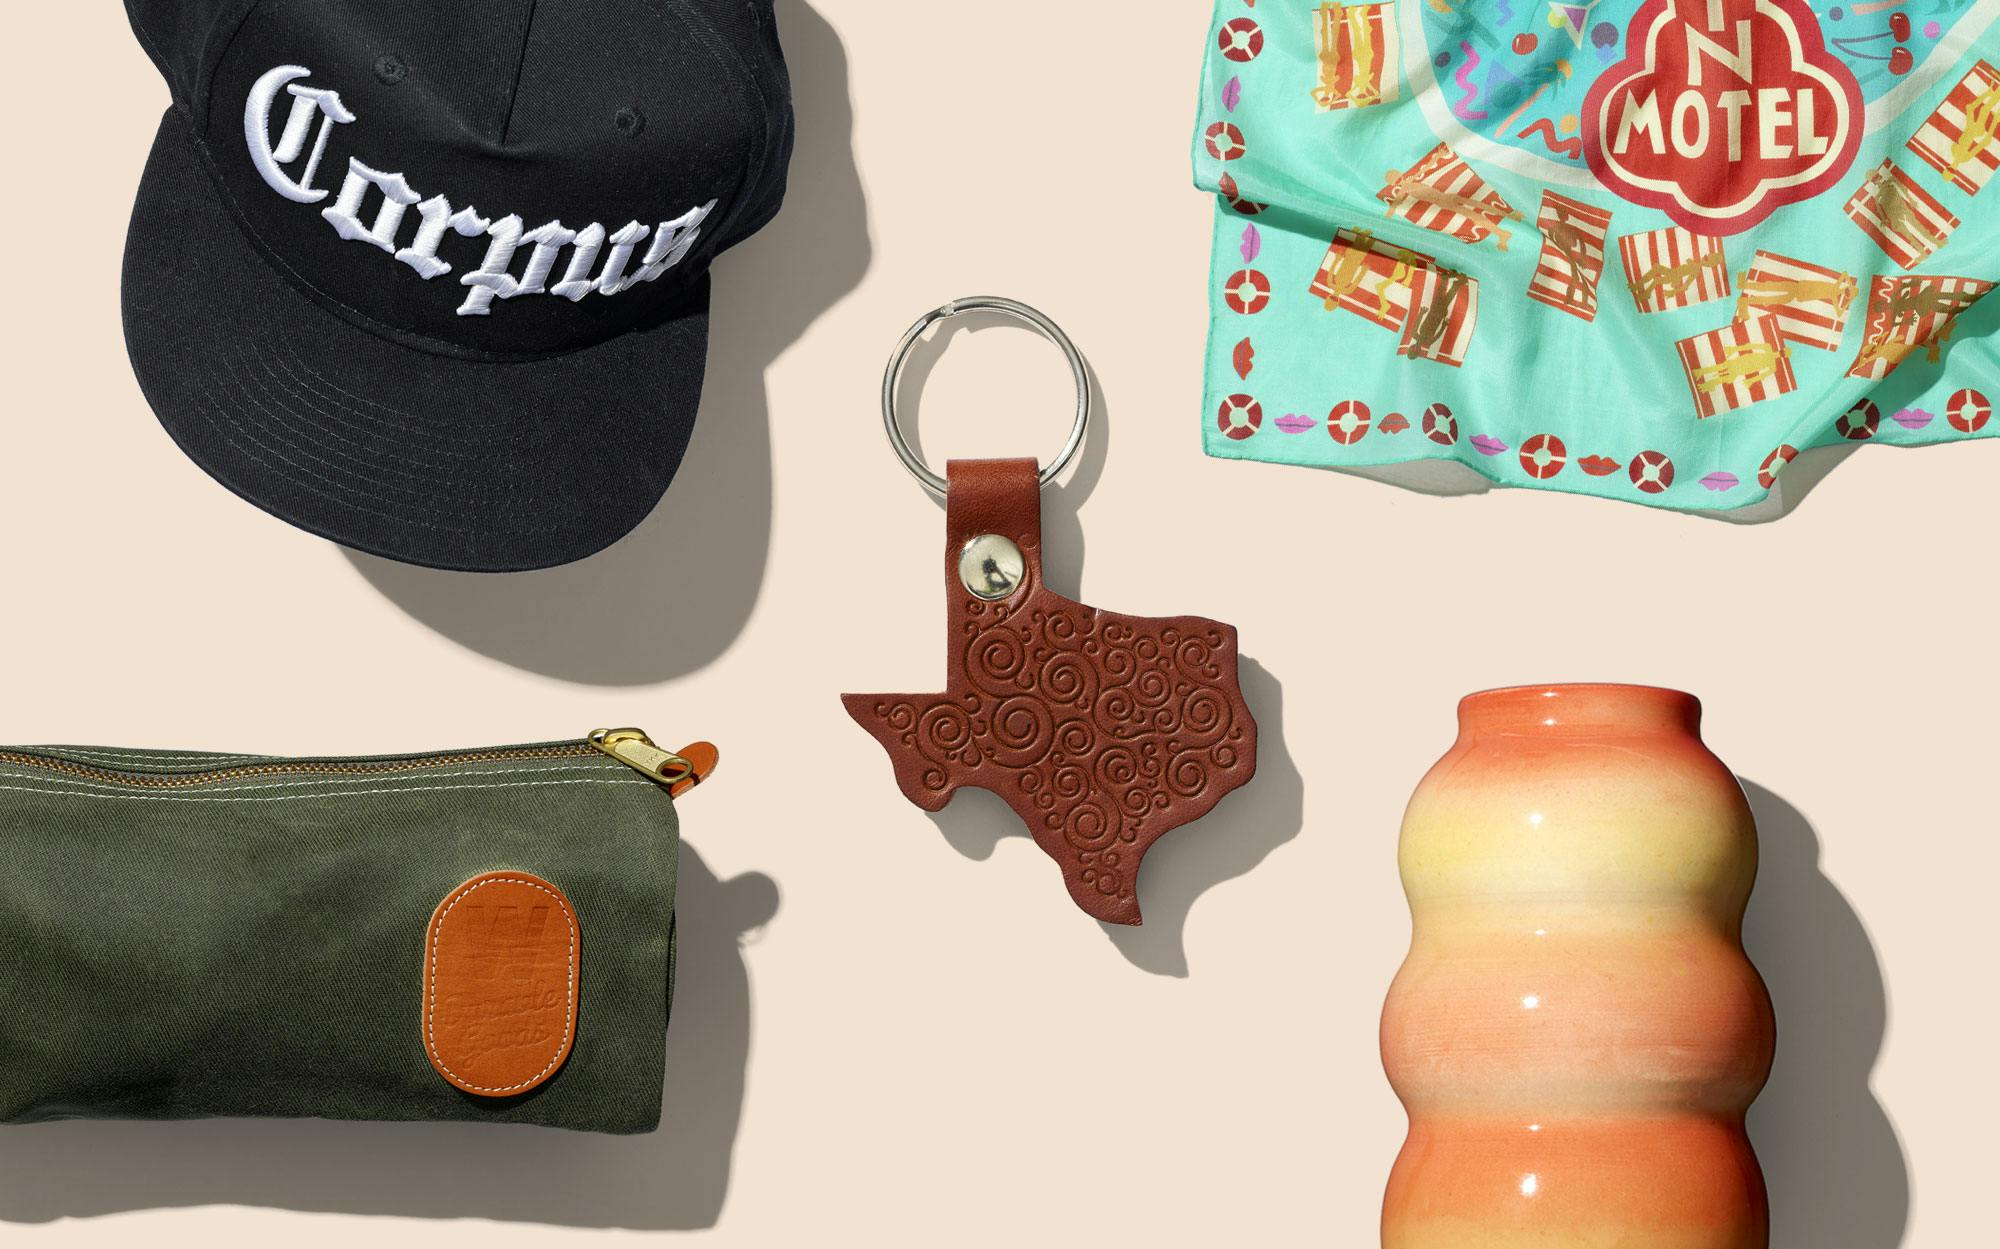 Gifts Under $25, Houston life and style